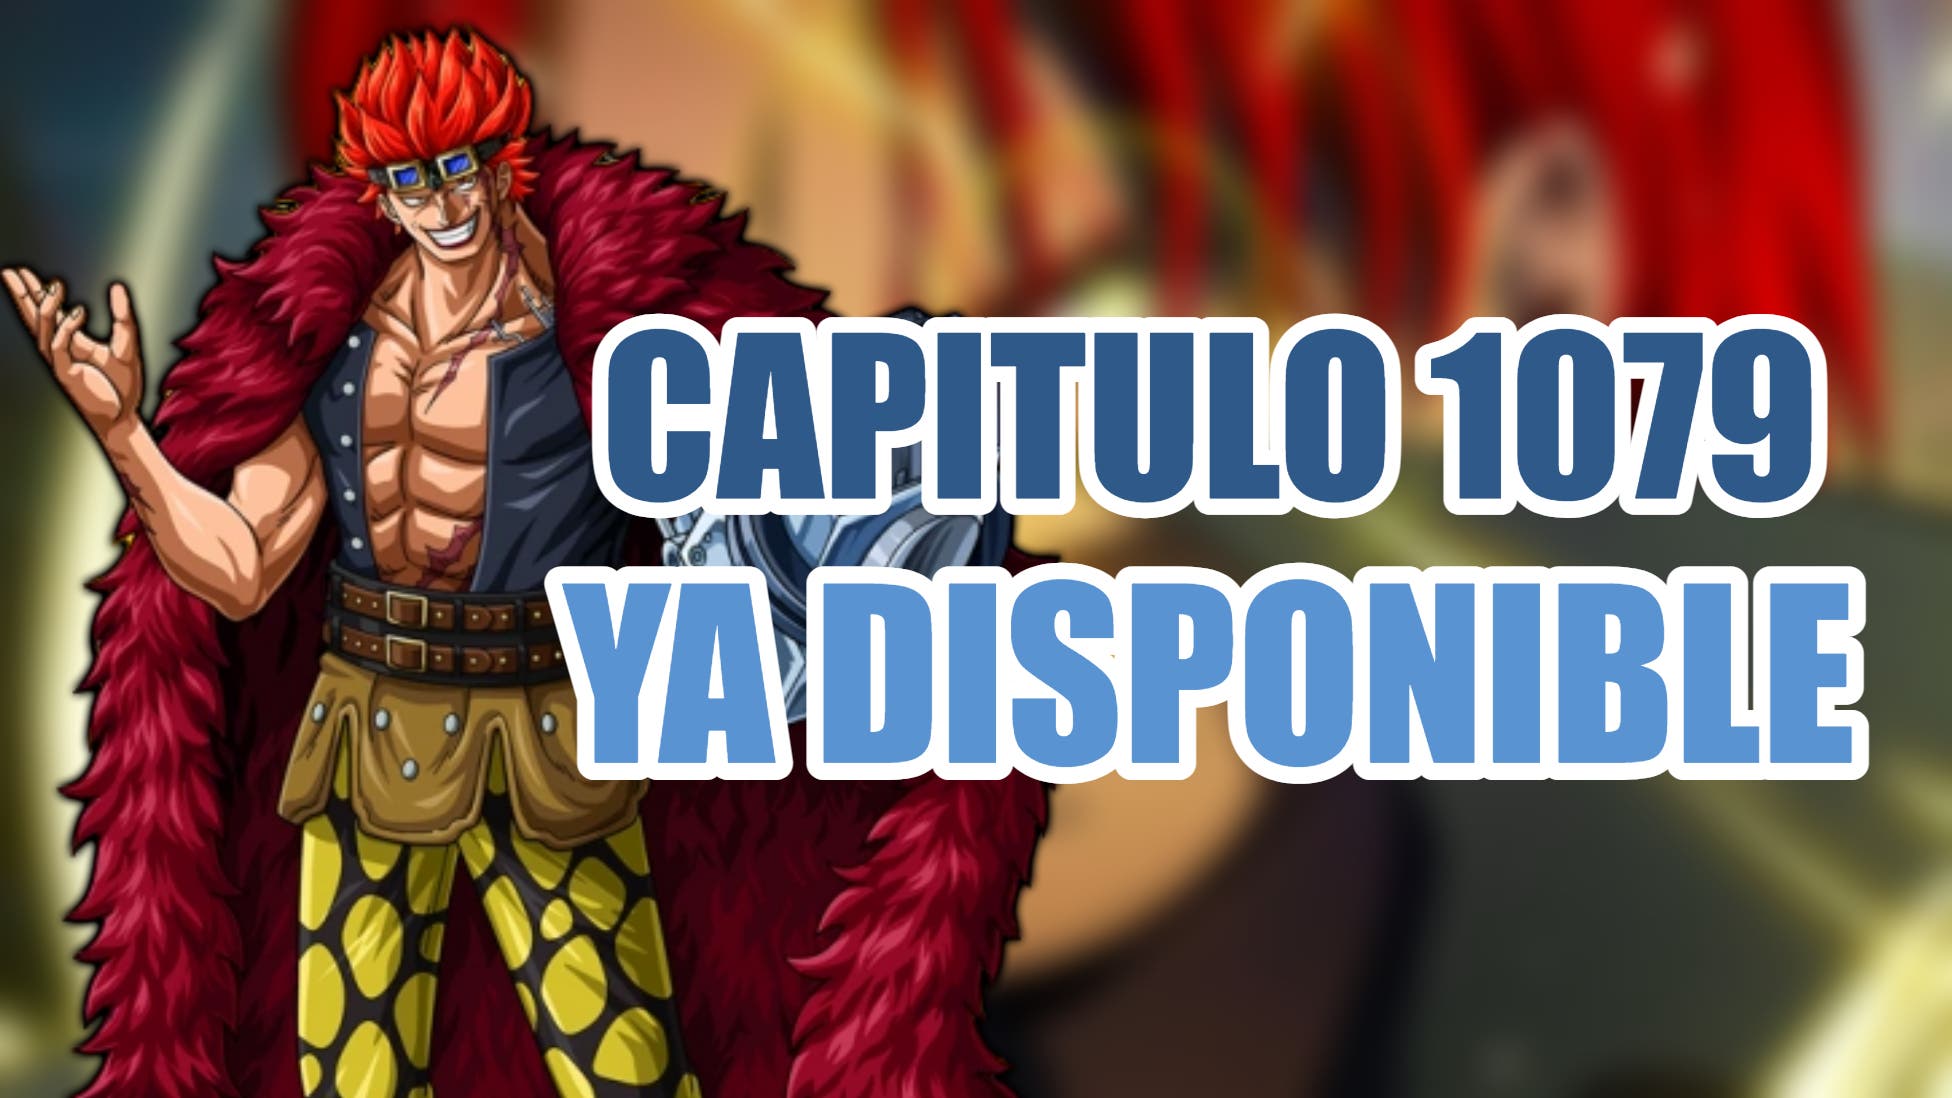 One Piece: now available for free and in Spanish, manga chapter 1079